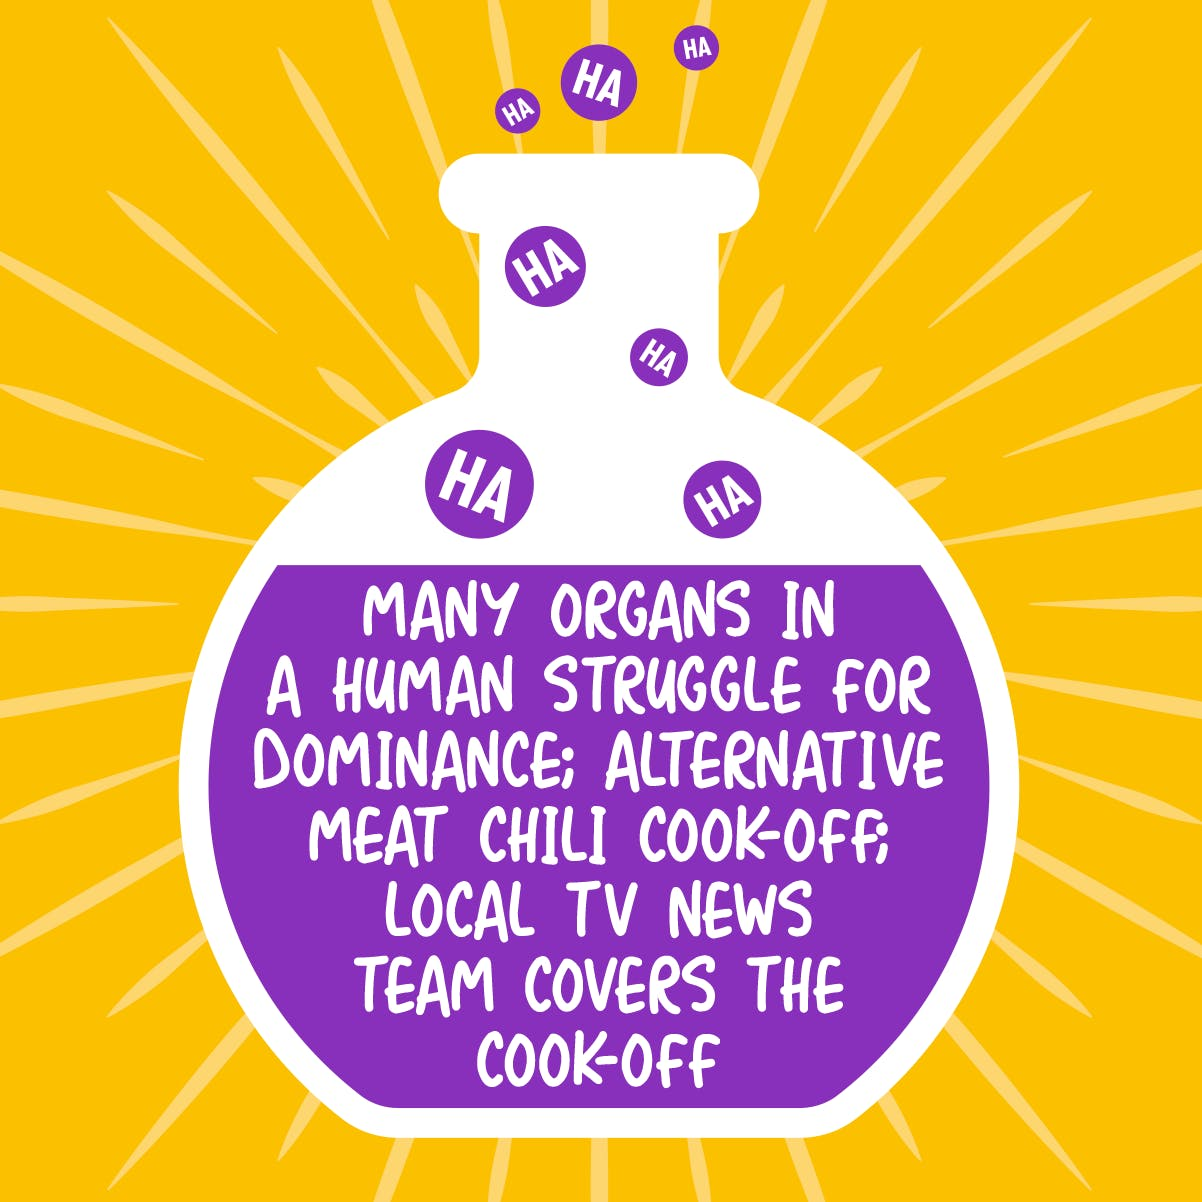 Many Organs in a Human Struggle for Dominance; Alternative Meat Chili Cook-Off; Local TV News Team Covers the Cook-Off